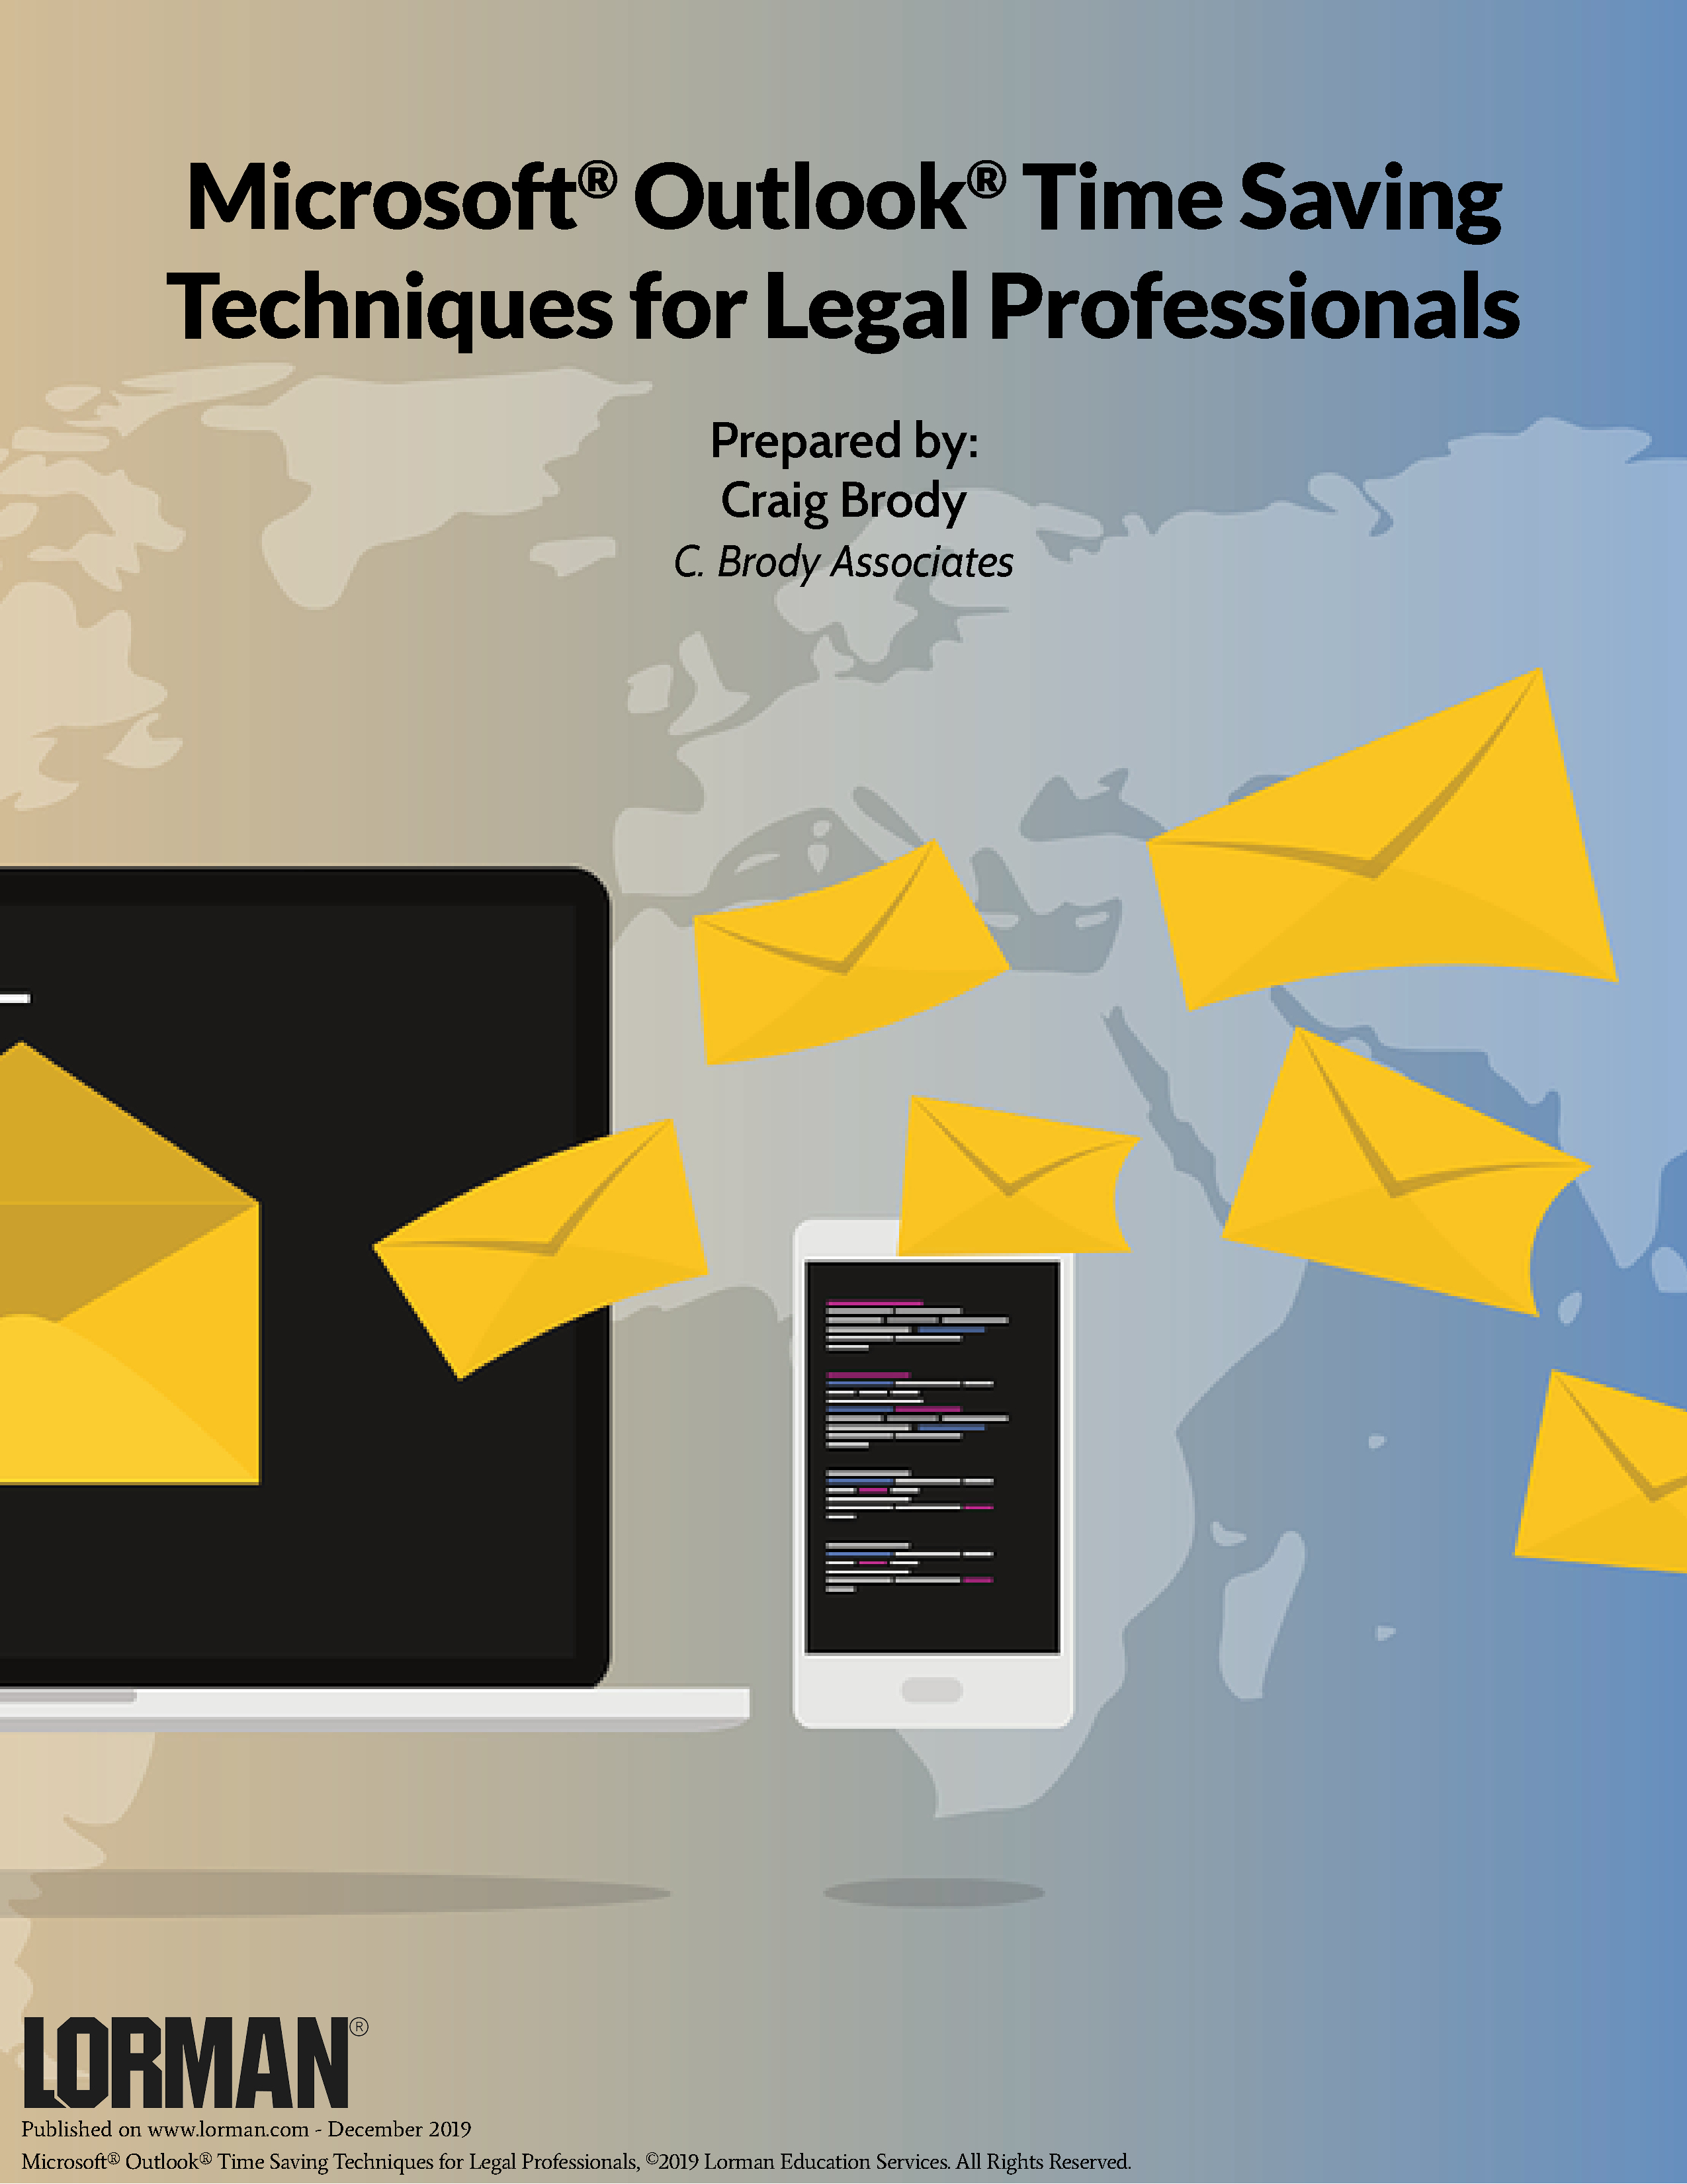 Microsoft® Outlook® Time Saving Techniques for Legal Professionals